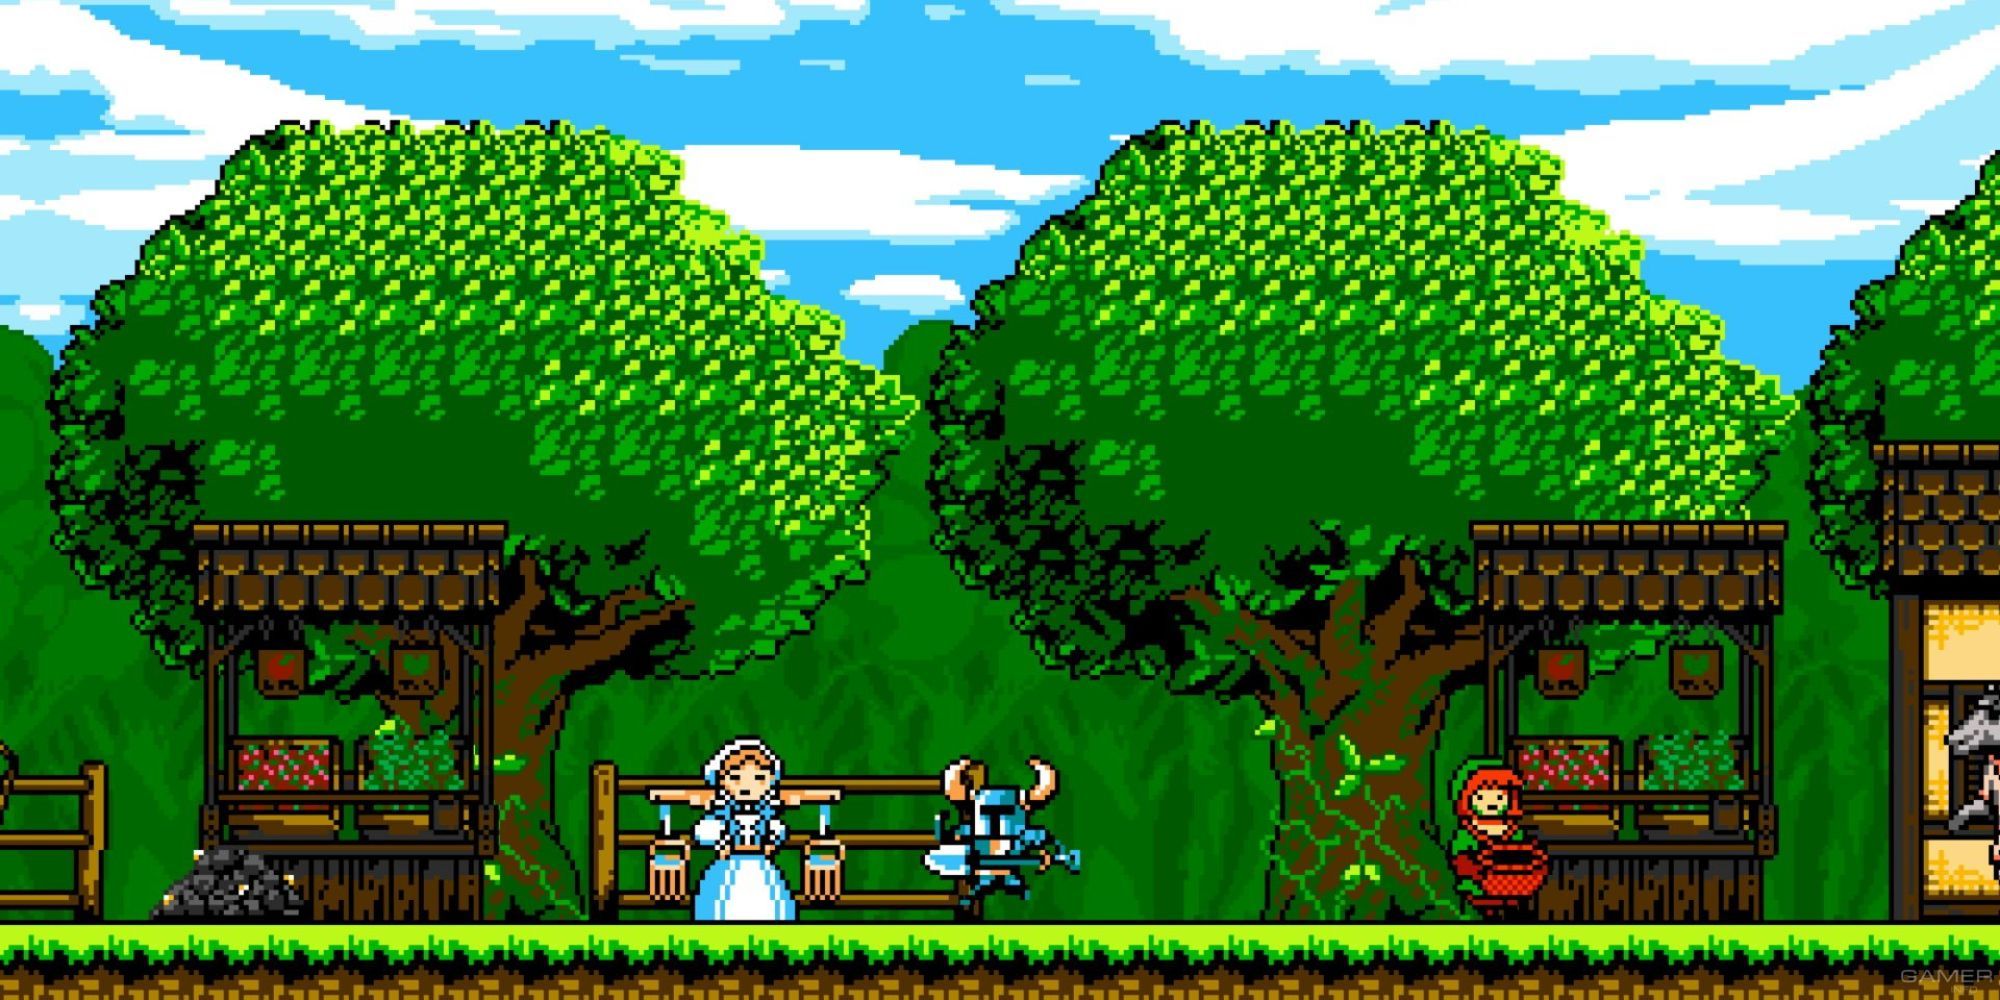 Image from the game Shovel Knight featuring the knight surrounded by green trees